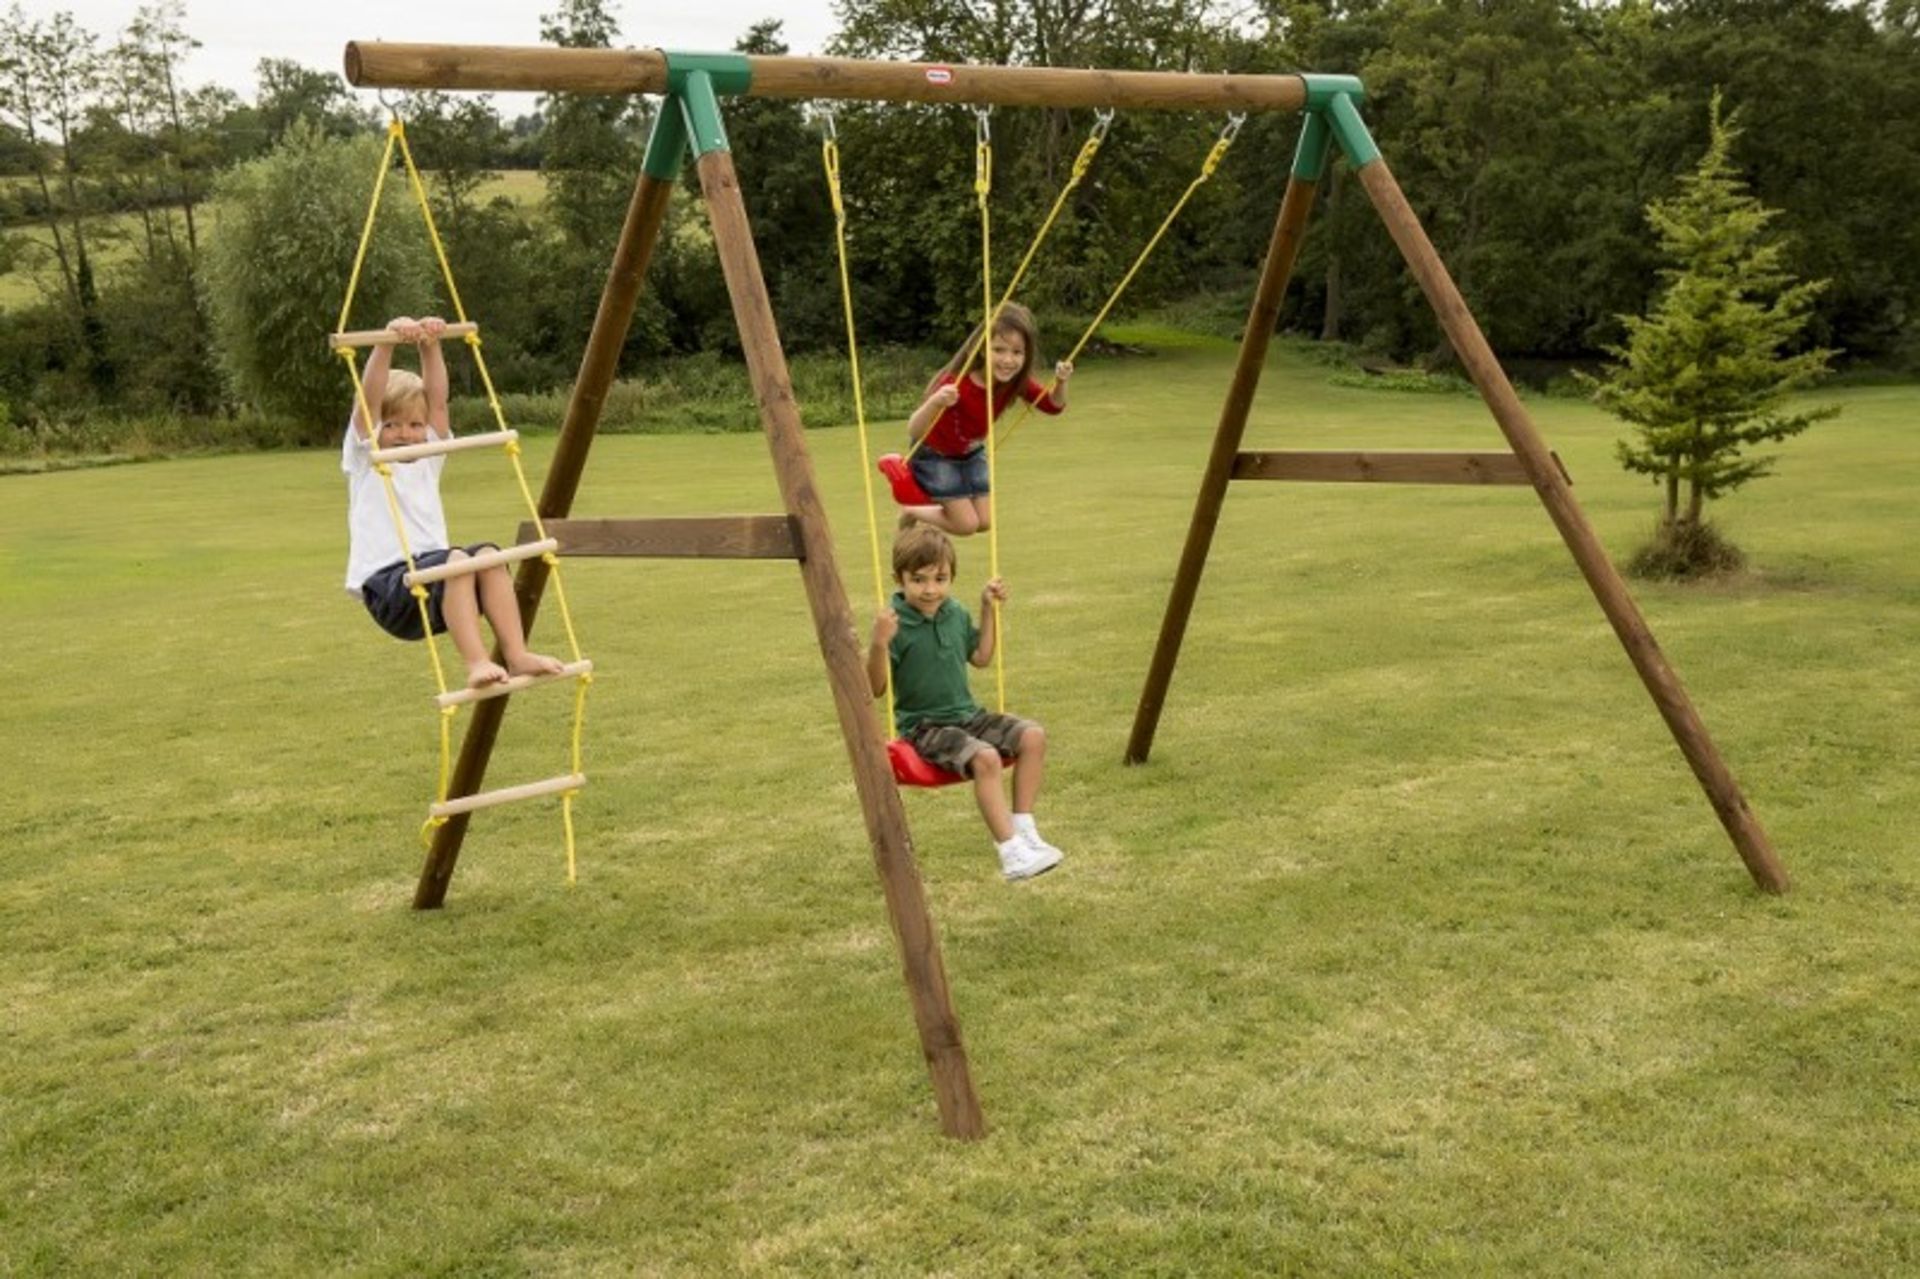 1 x Riga Swing Set with Ladder. RRP £319.99. This wooden play system will provide hours of outdoor